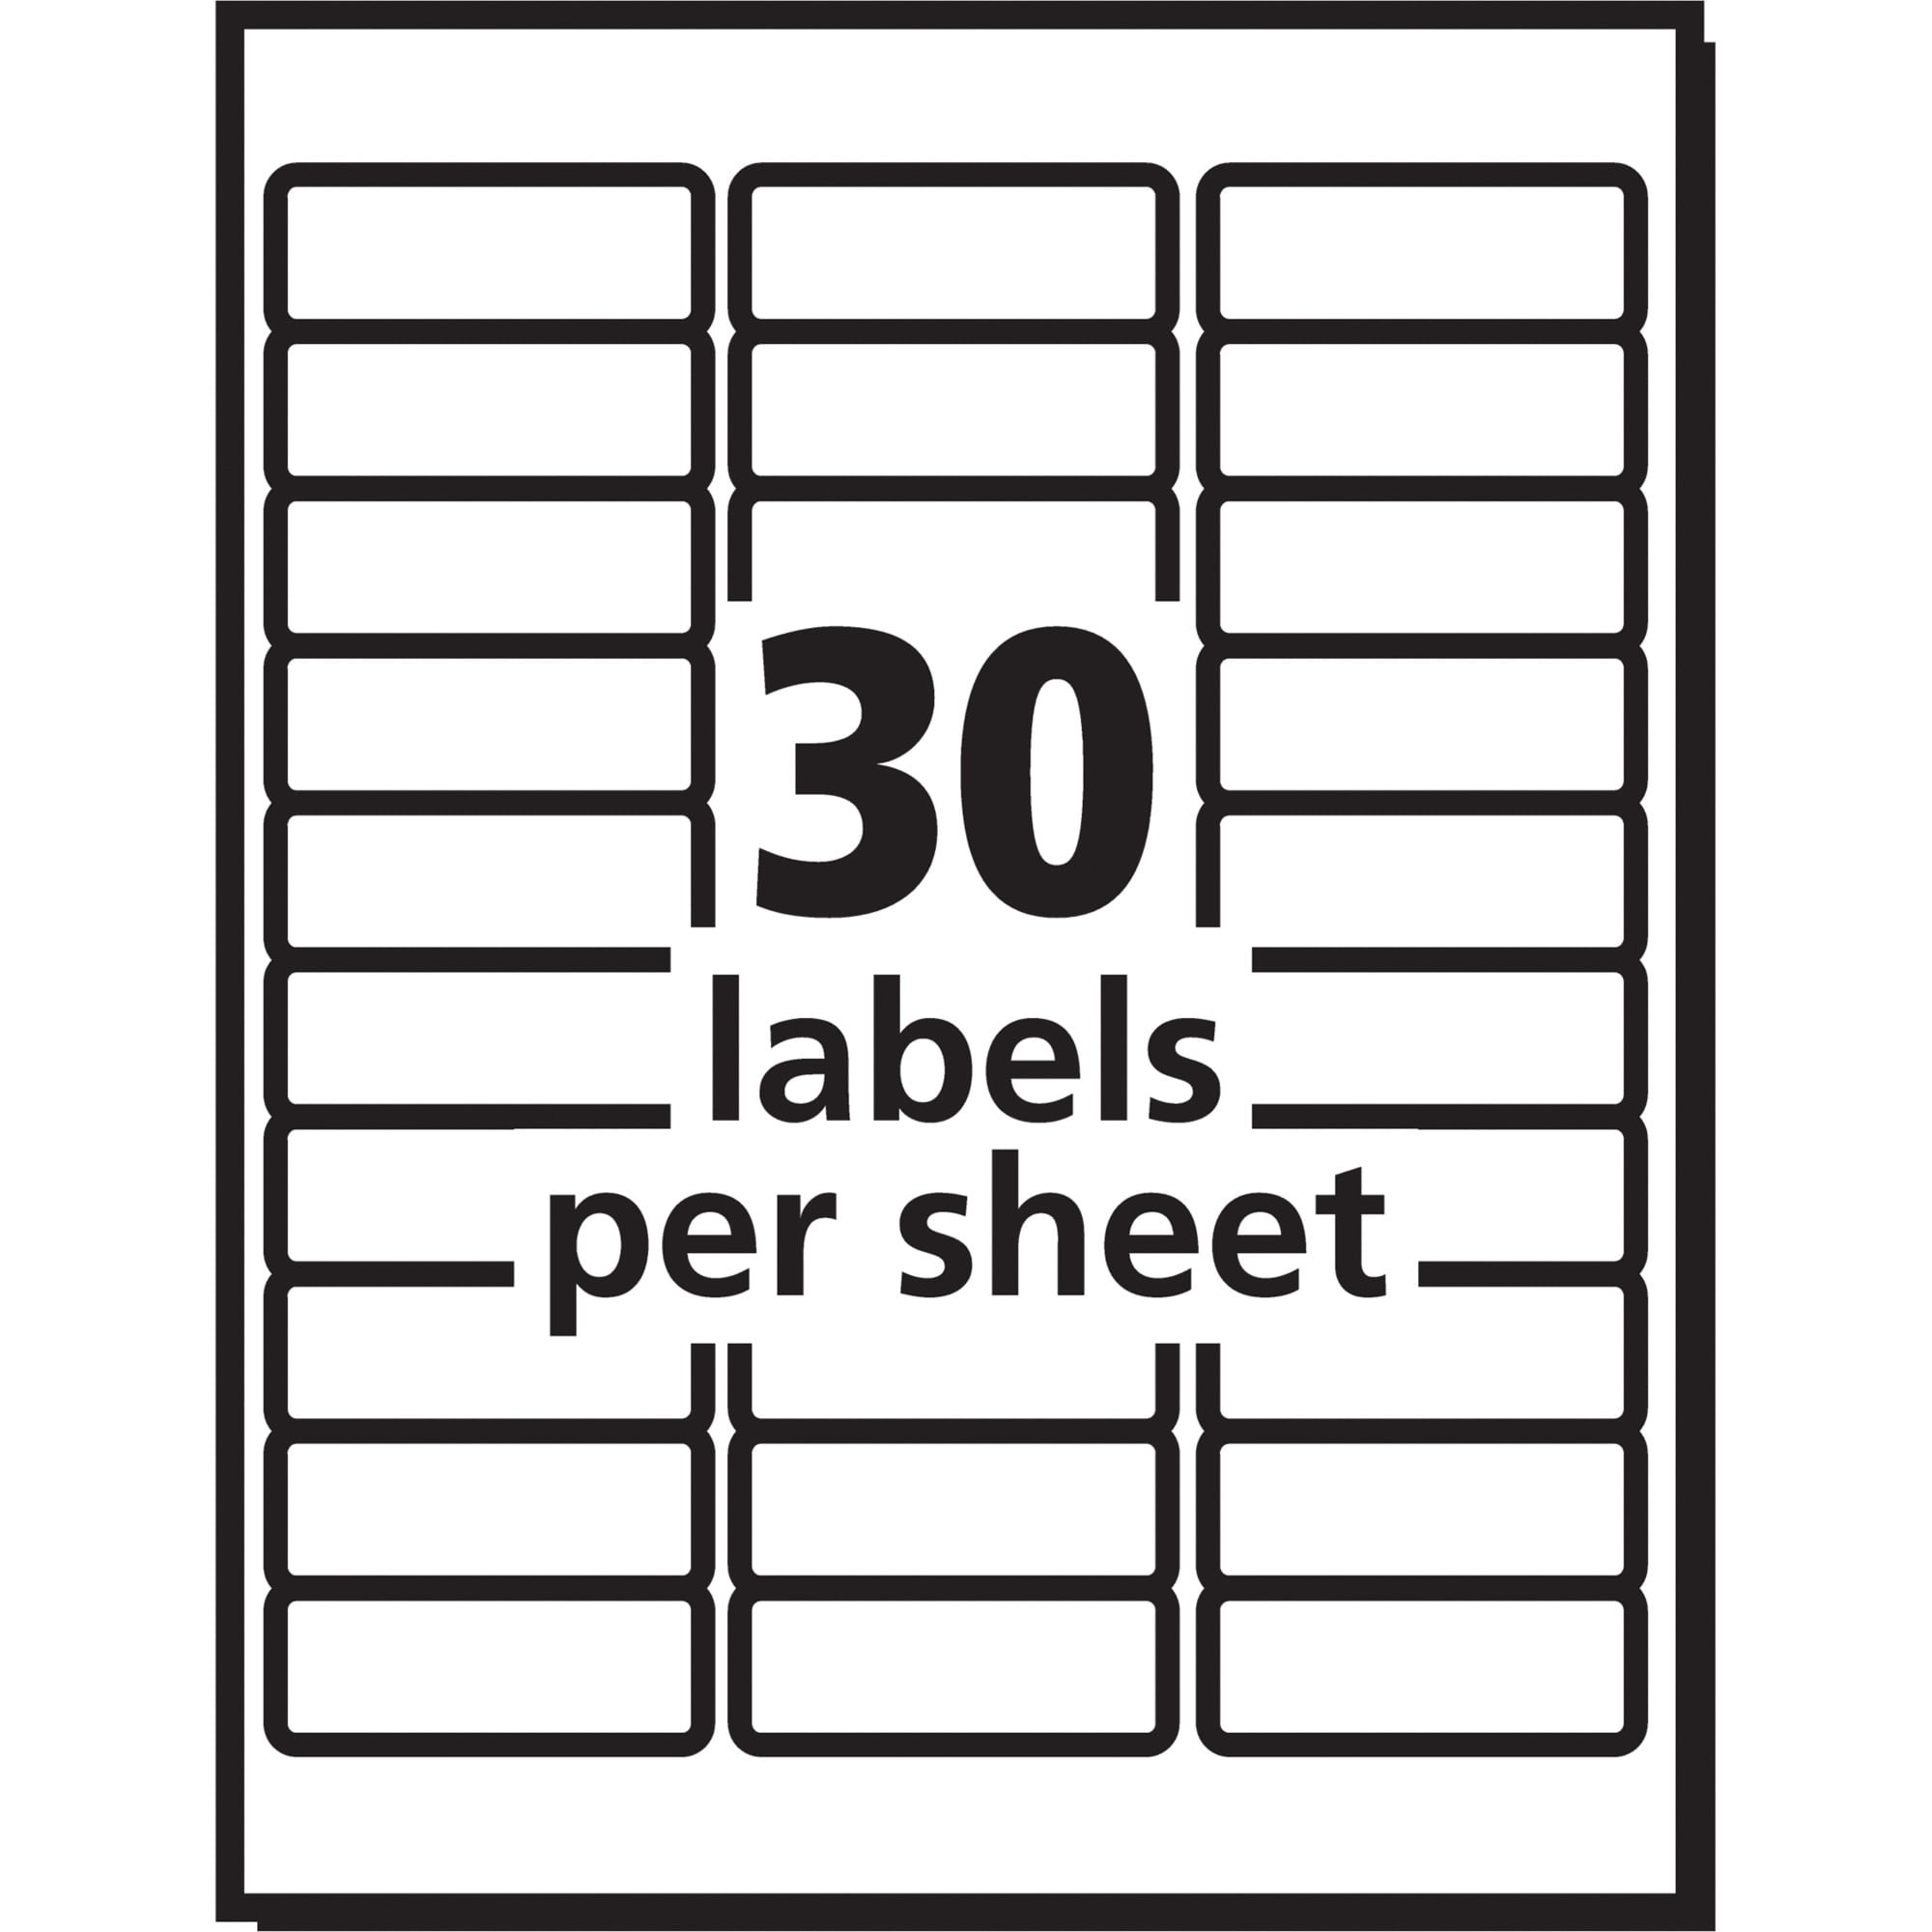 Avery 5160 Template Jar Labels Utensil Design 30 Per Page Works With